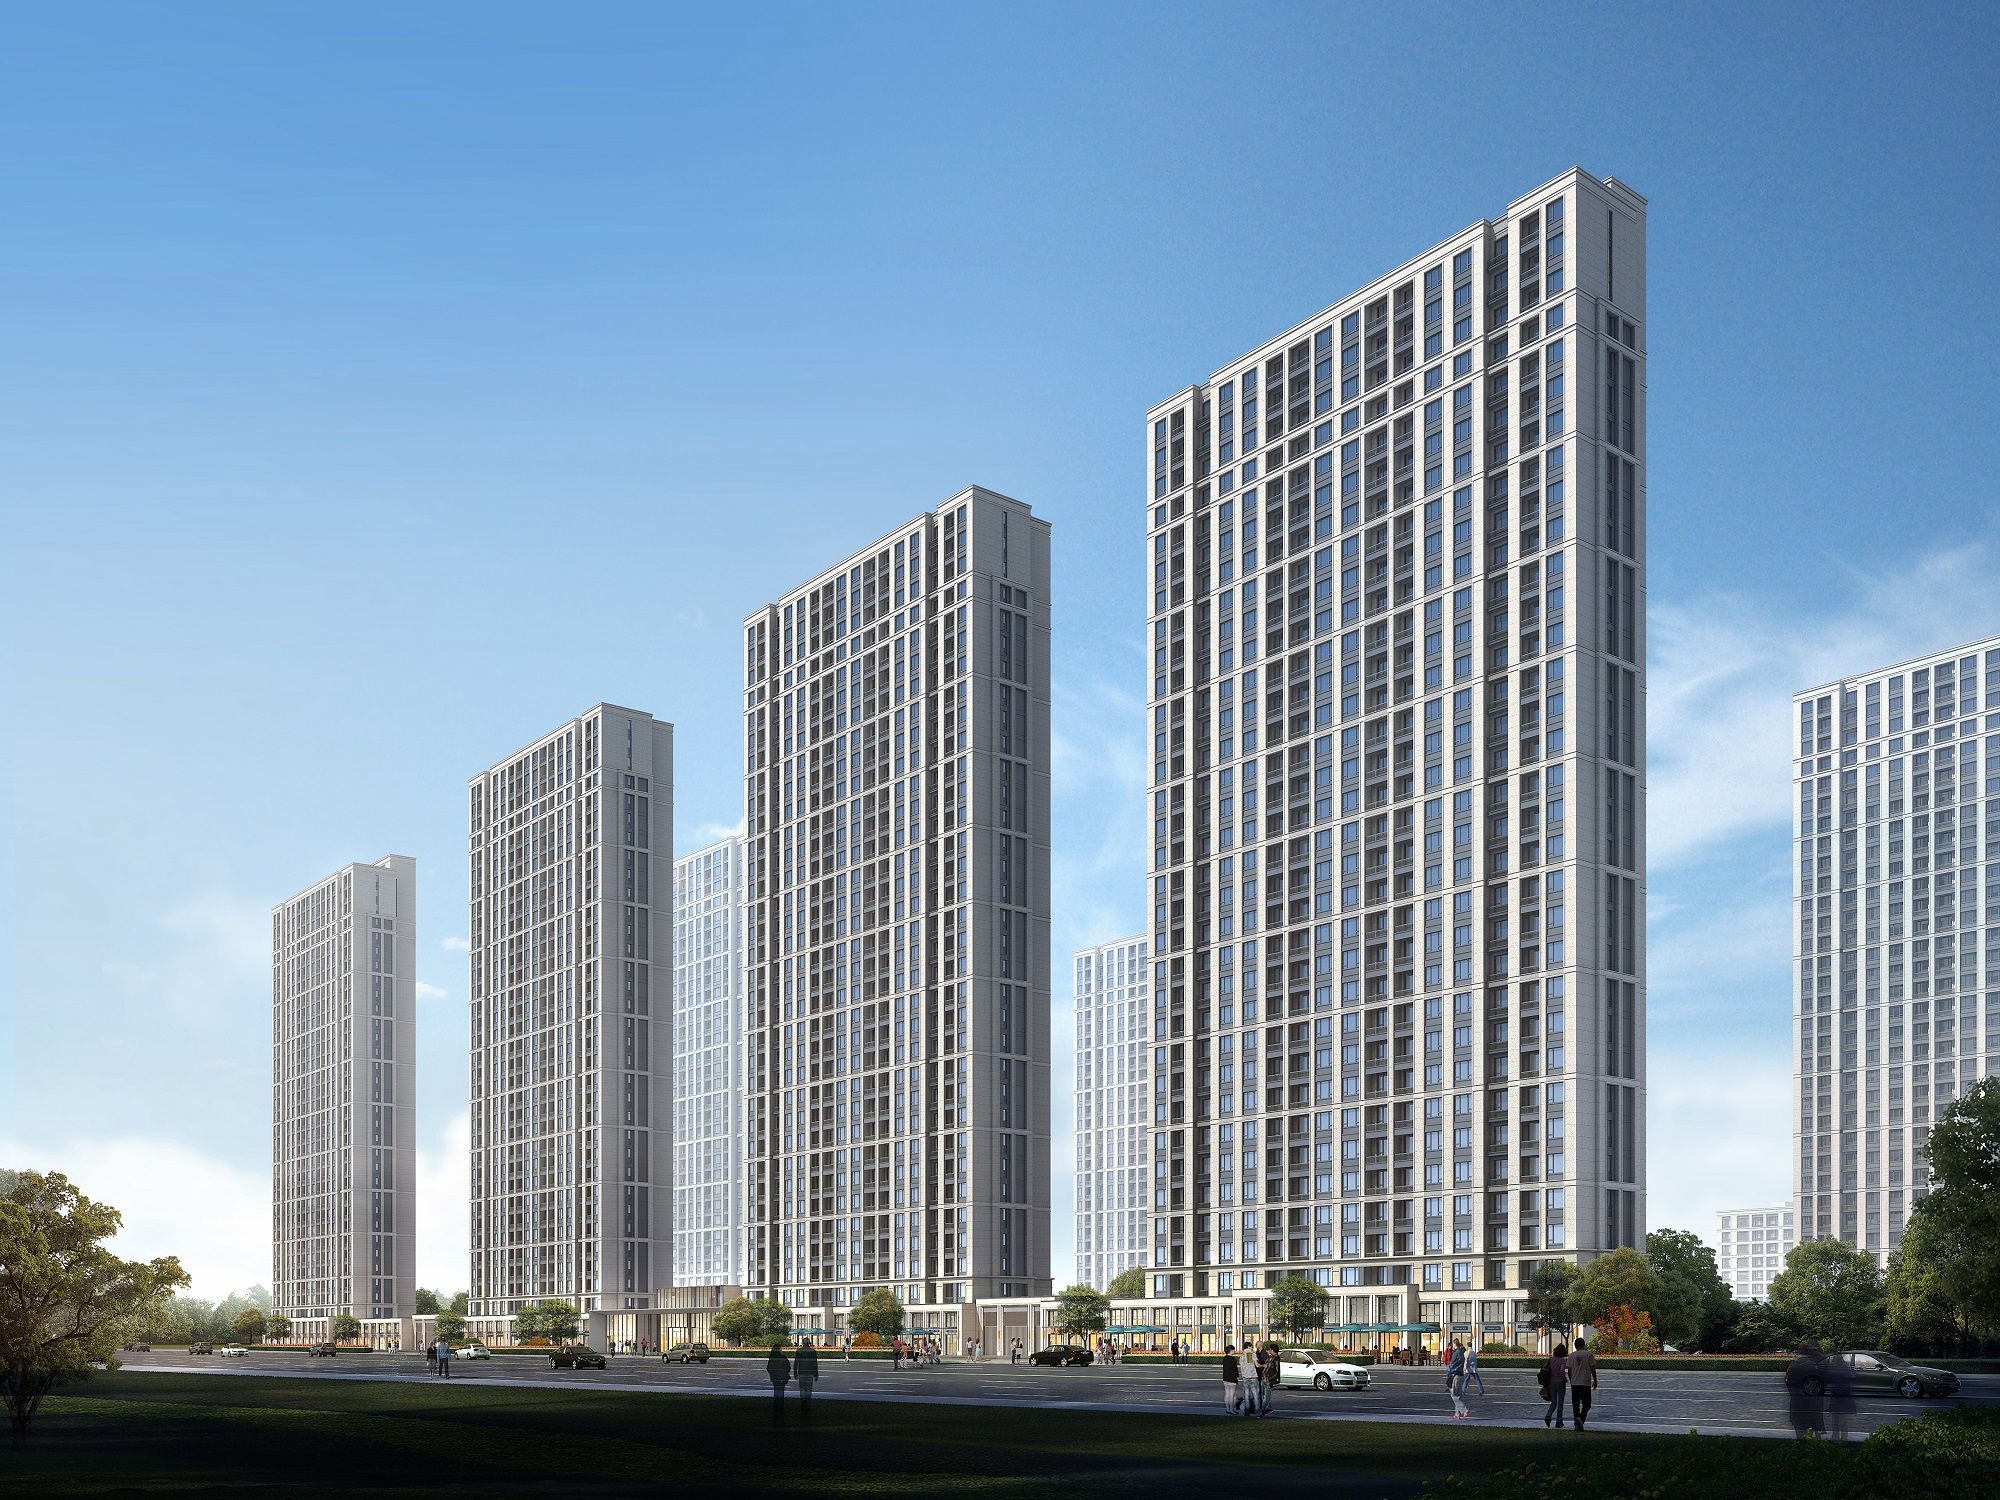 The housing project of Harbin Wanda Cultural Tourism City